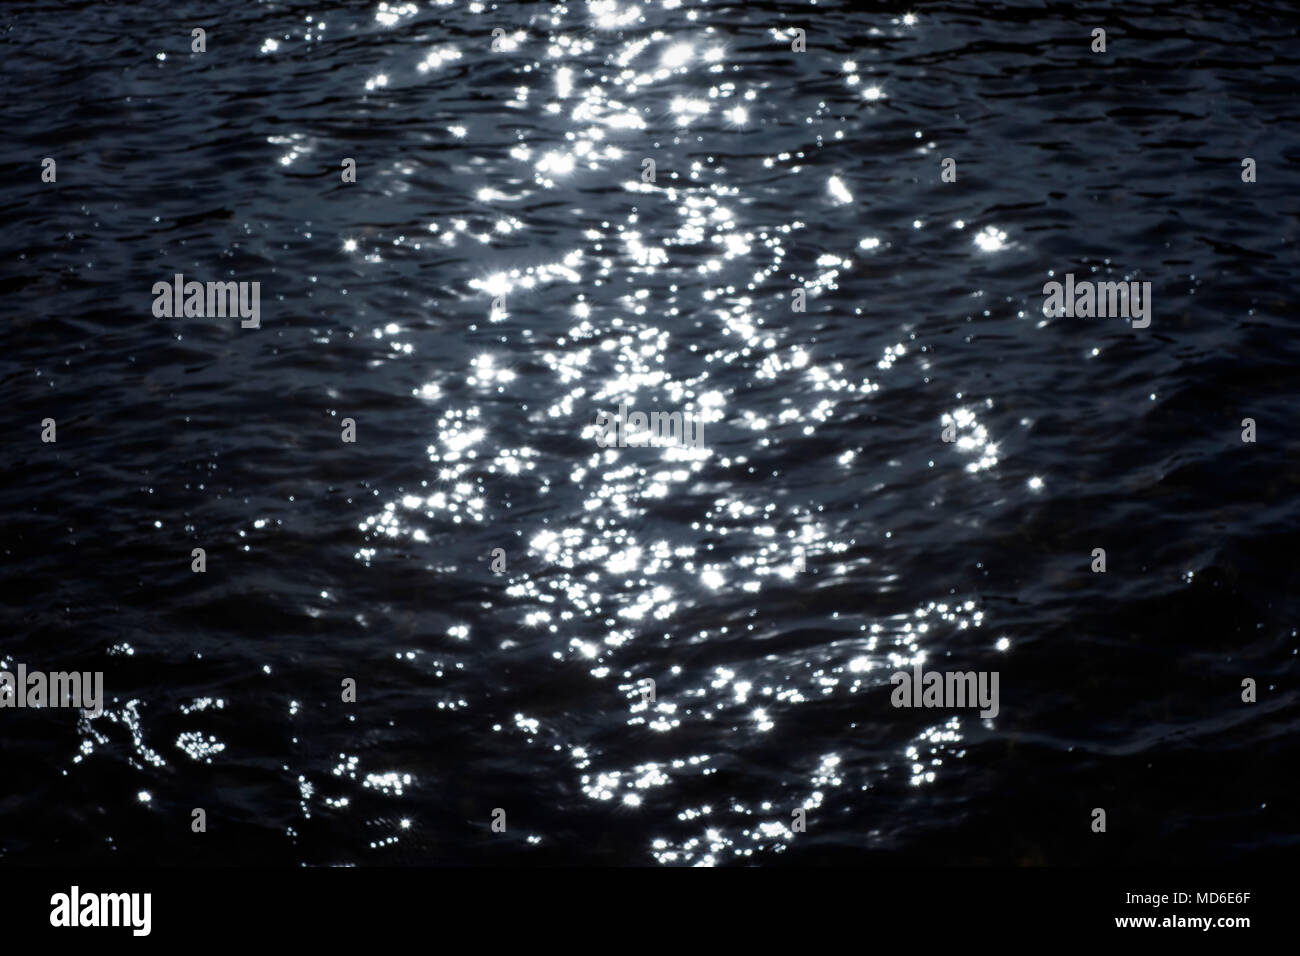 Blured sunset lights shining on the water. Stock Photo